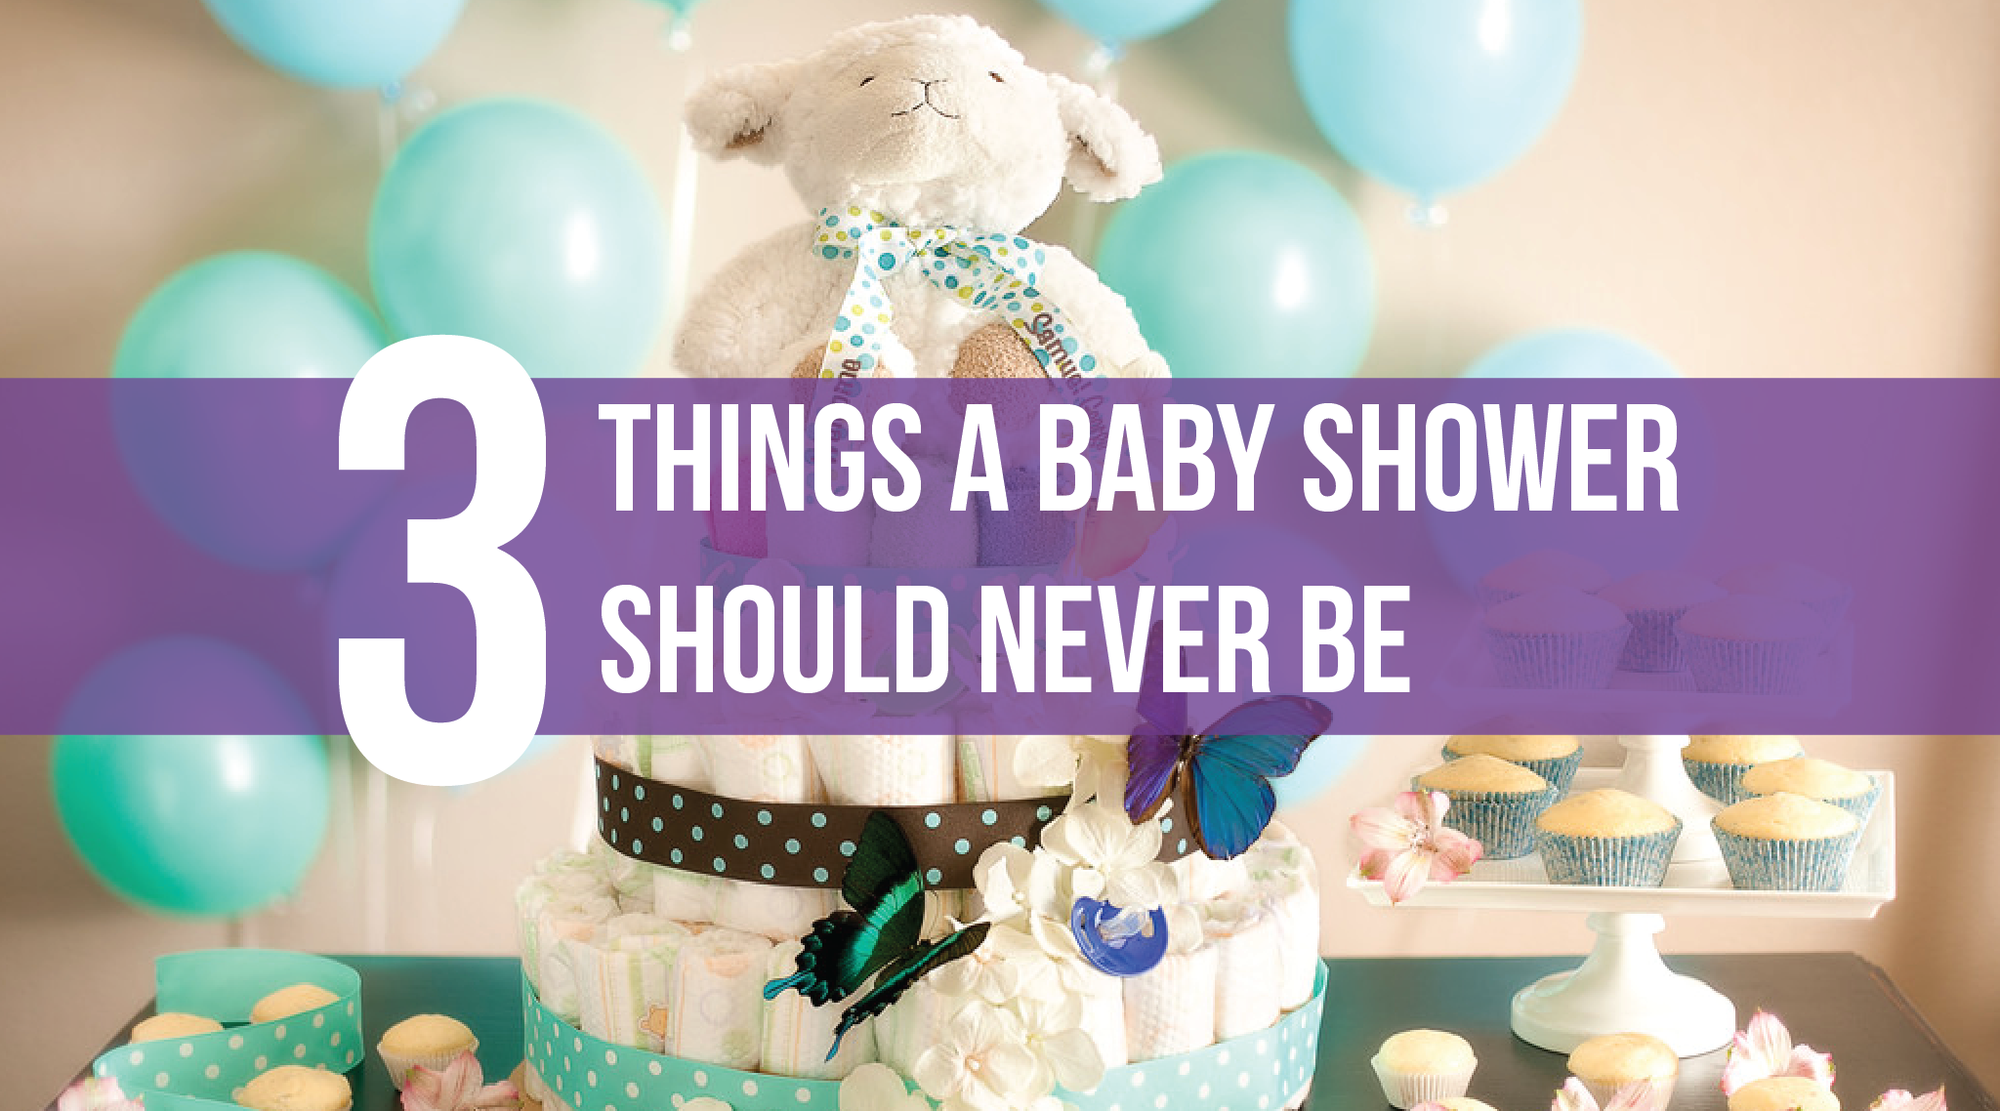 3 Things a Baby Shower Should Never Be